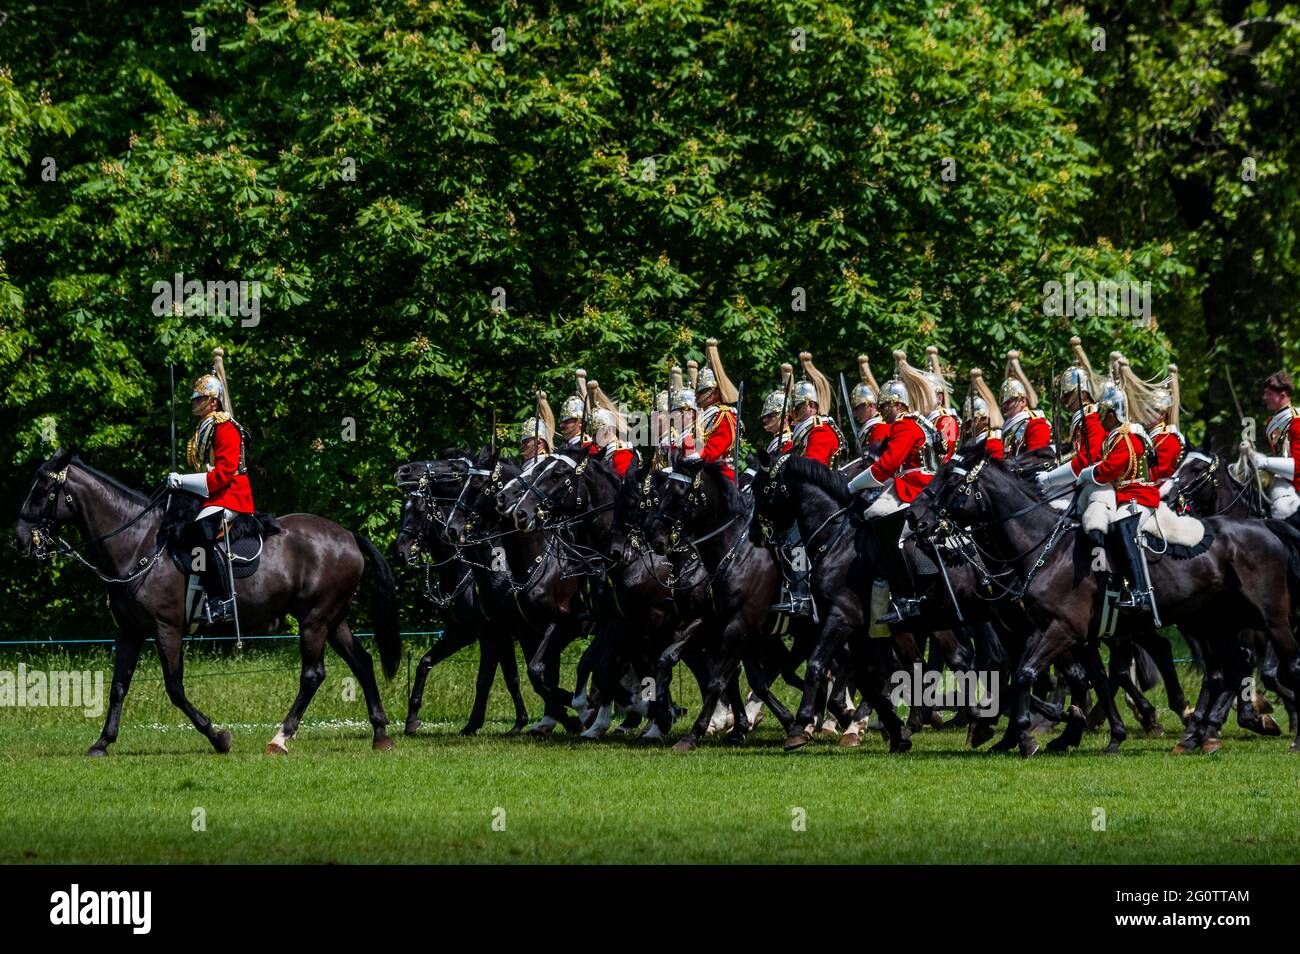 London, UK. 3 Jun 2021. The Major General's Inspection of the Household Cavalry Mounted Regiment in Hyde Park. Around 170 horses and personnel of the Household Cavalry Mounted Regiment accompanied by the mounted band of the Household Cavalry with their shire Drum Horses. The test must be passed in order to participate in upcoming State Ceremonial duties and, for the first time since 2019, that includes the honour of taking part in this year's Queen's Birthday Parade. An inspection of horsemanship, turnout and State Ceremonial uniform will be made by Major General Chris Ghika, the General Offic Stock Photo